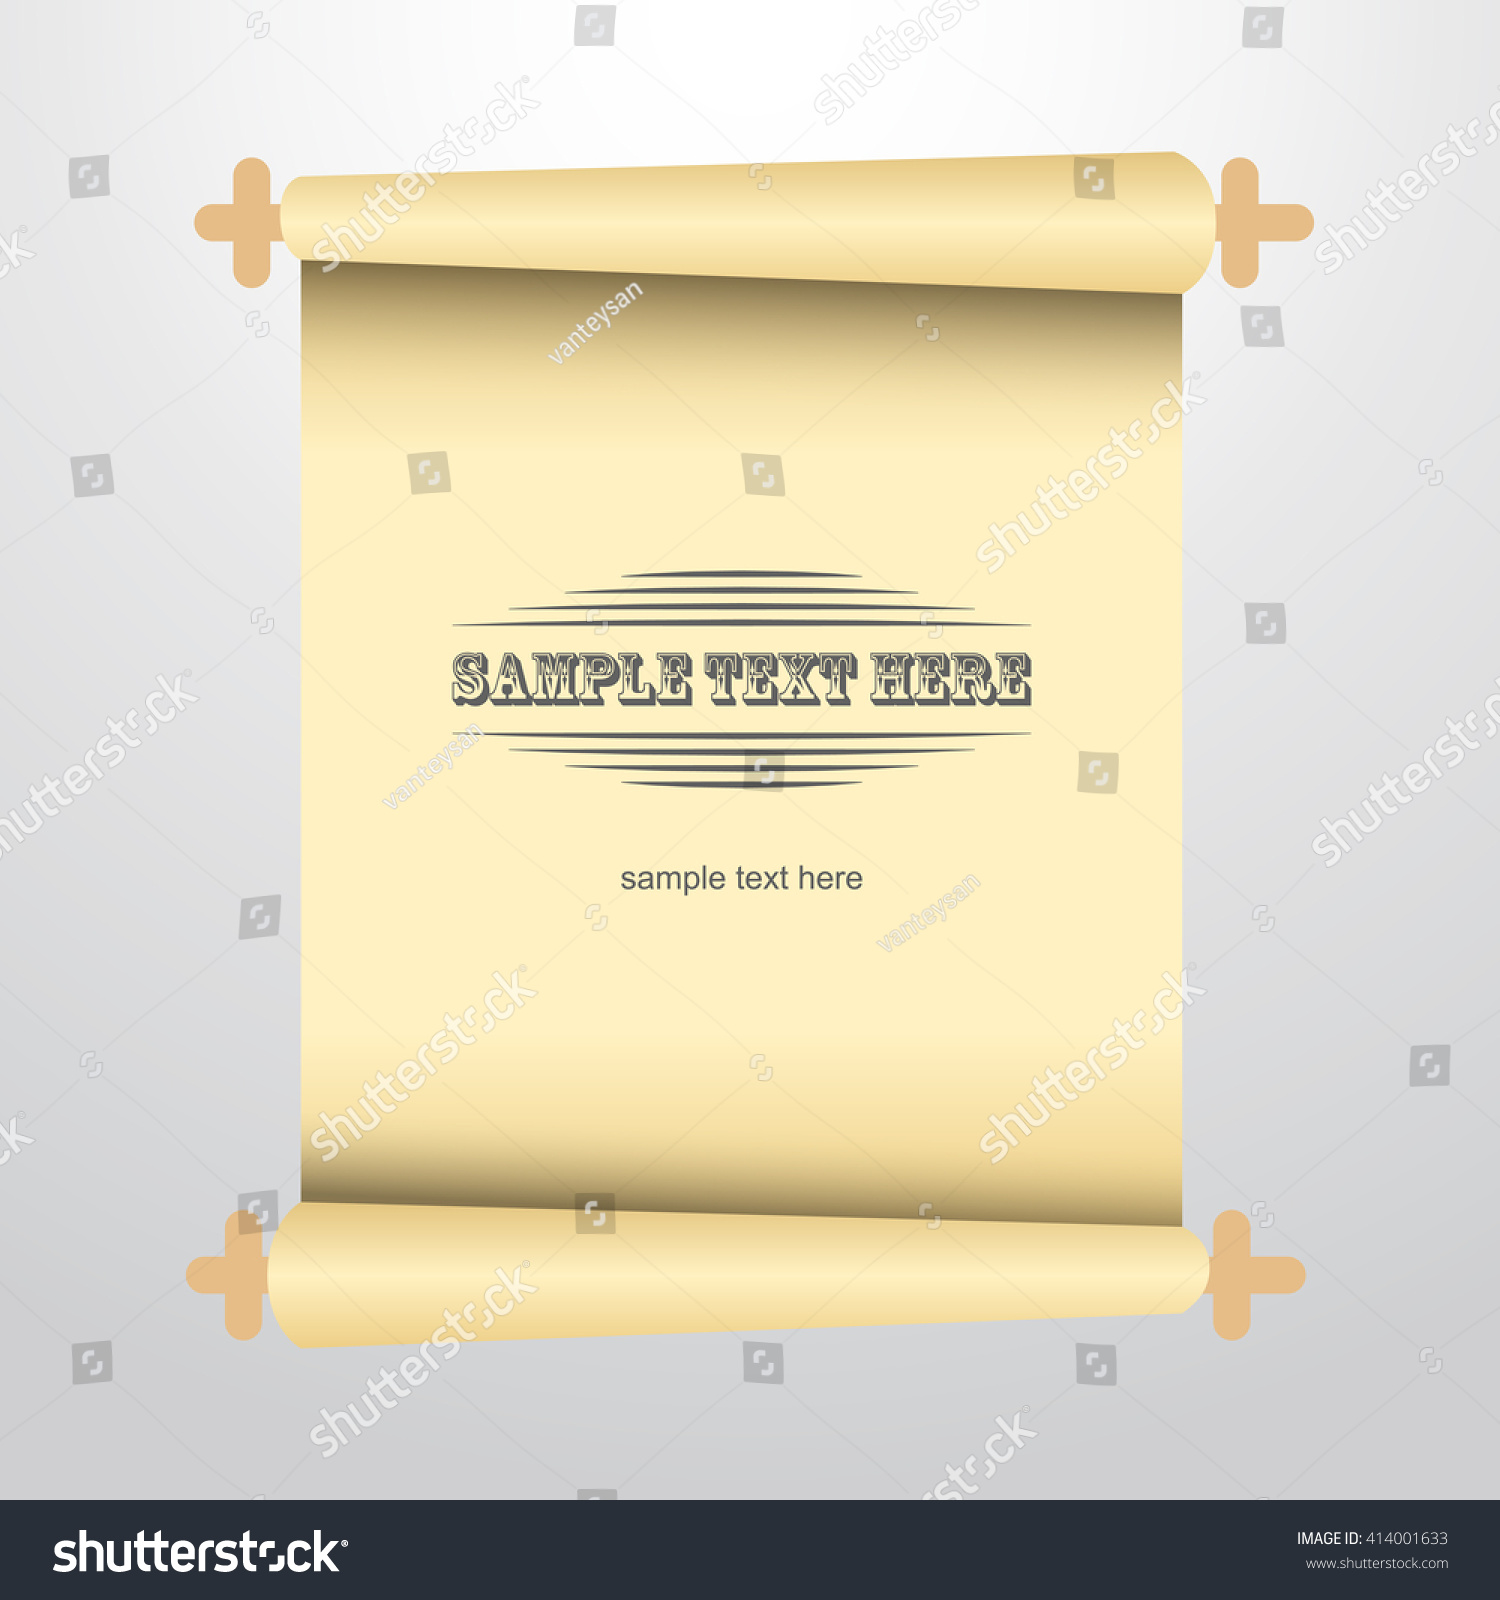 Vector Scrolled Old Paper Illustration Stock Vector 414001633 ...